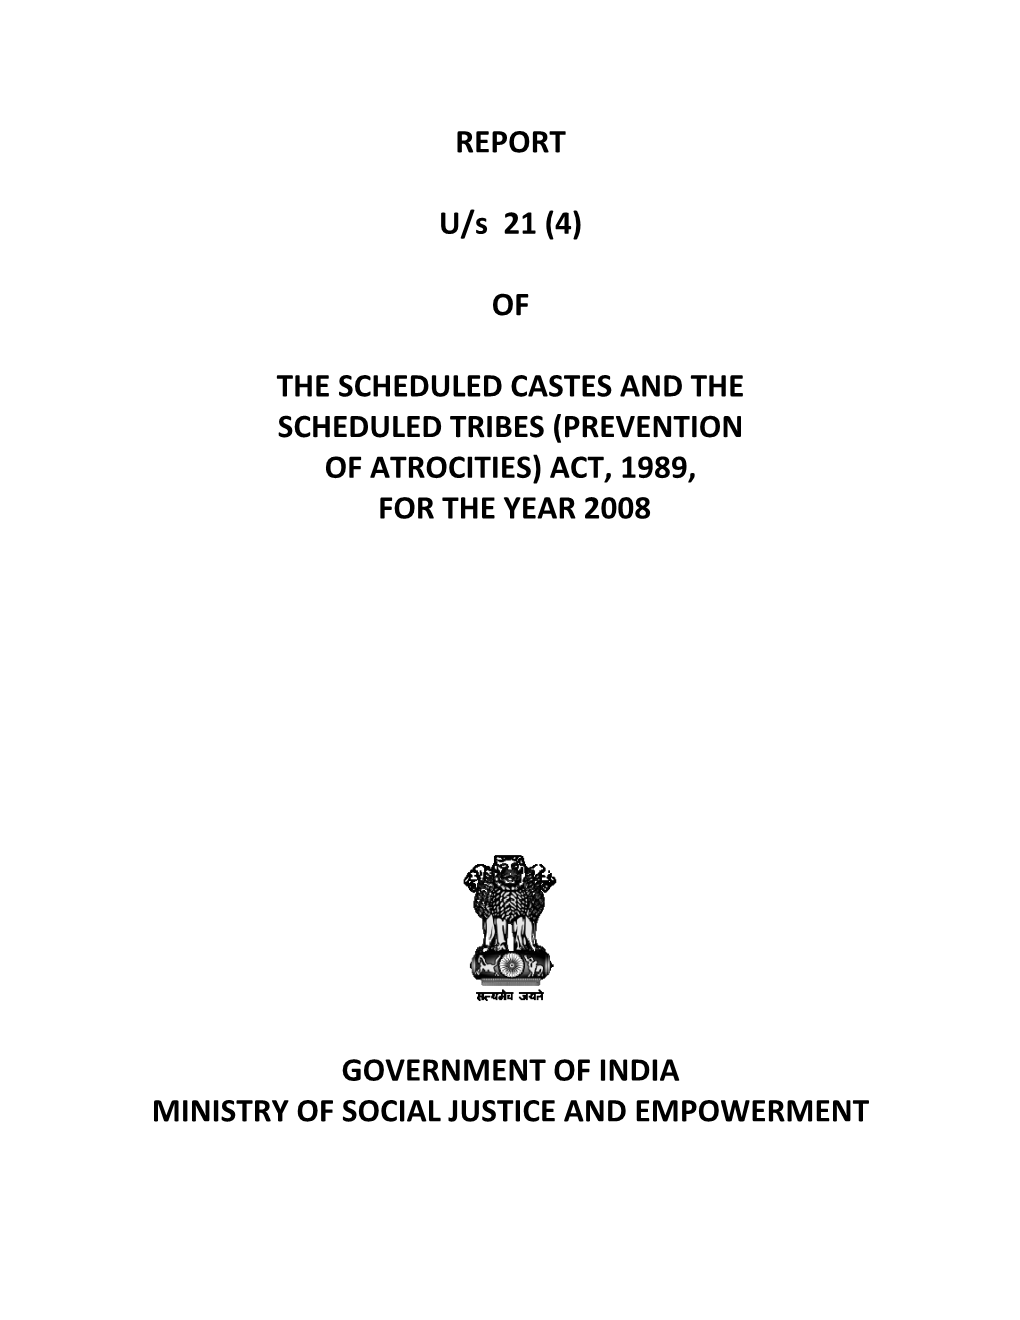 (Prevention of Atrocities) Act, 1989, for the Year 2008 Go